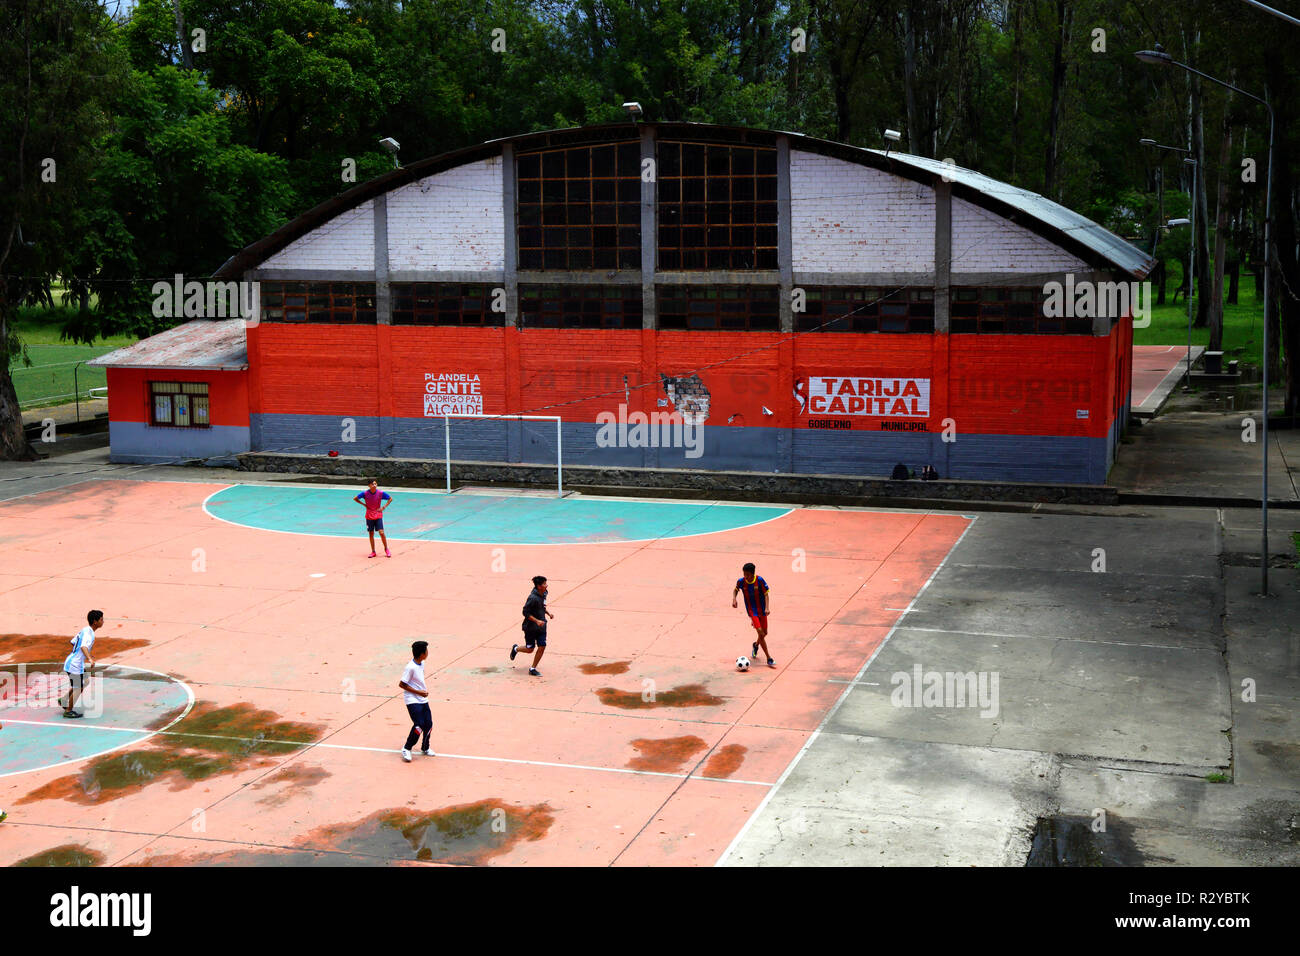 Youths playing football on outdoor concrete pitch in sports centre, Tarija, Bolivia Stock Photo